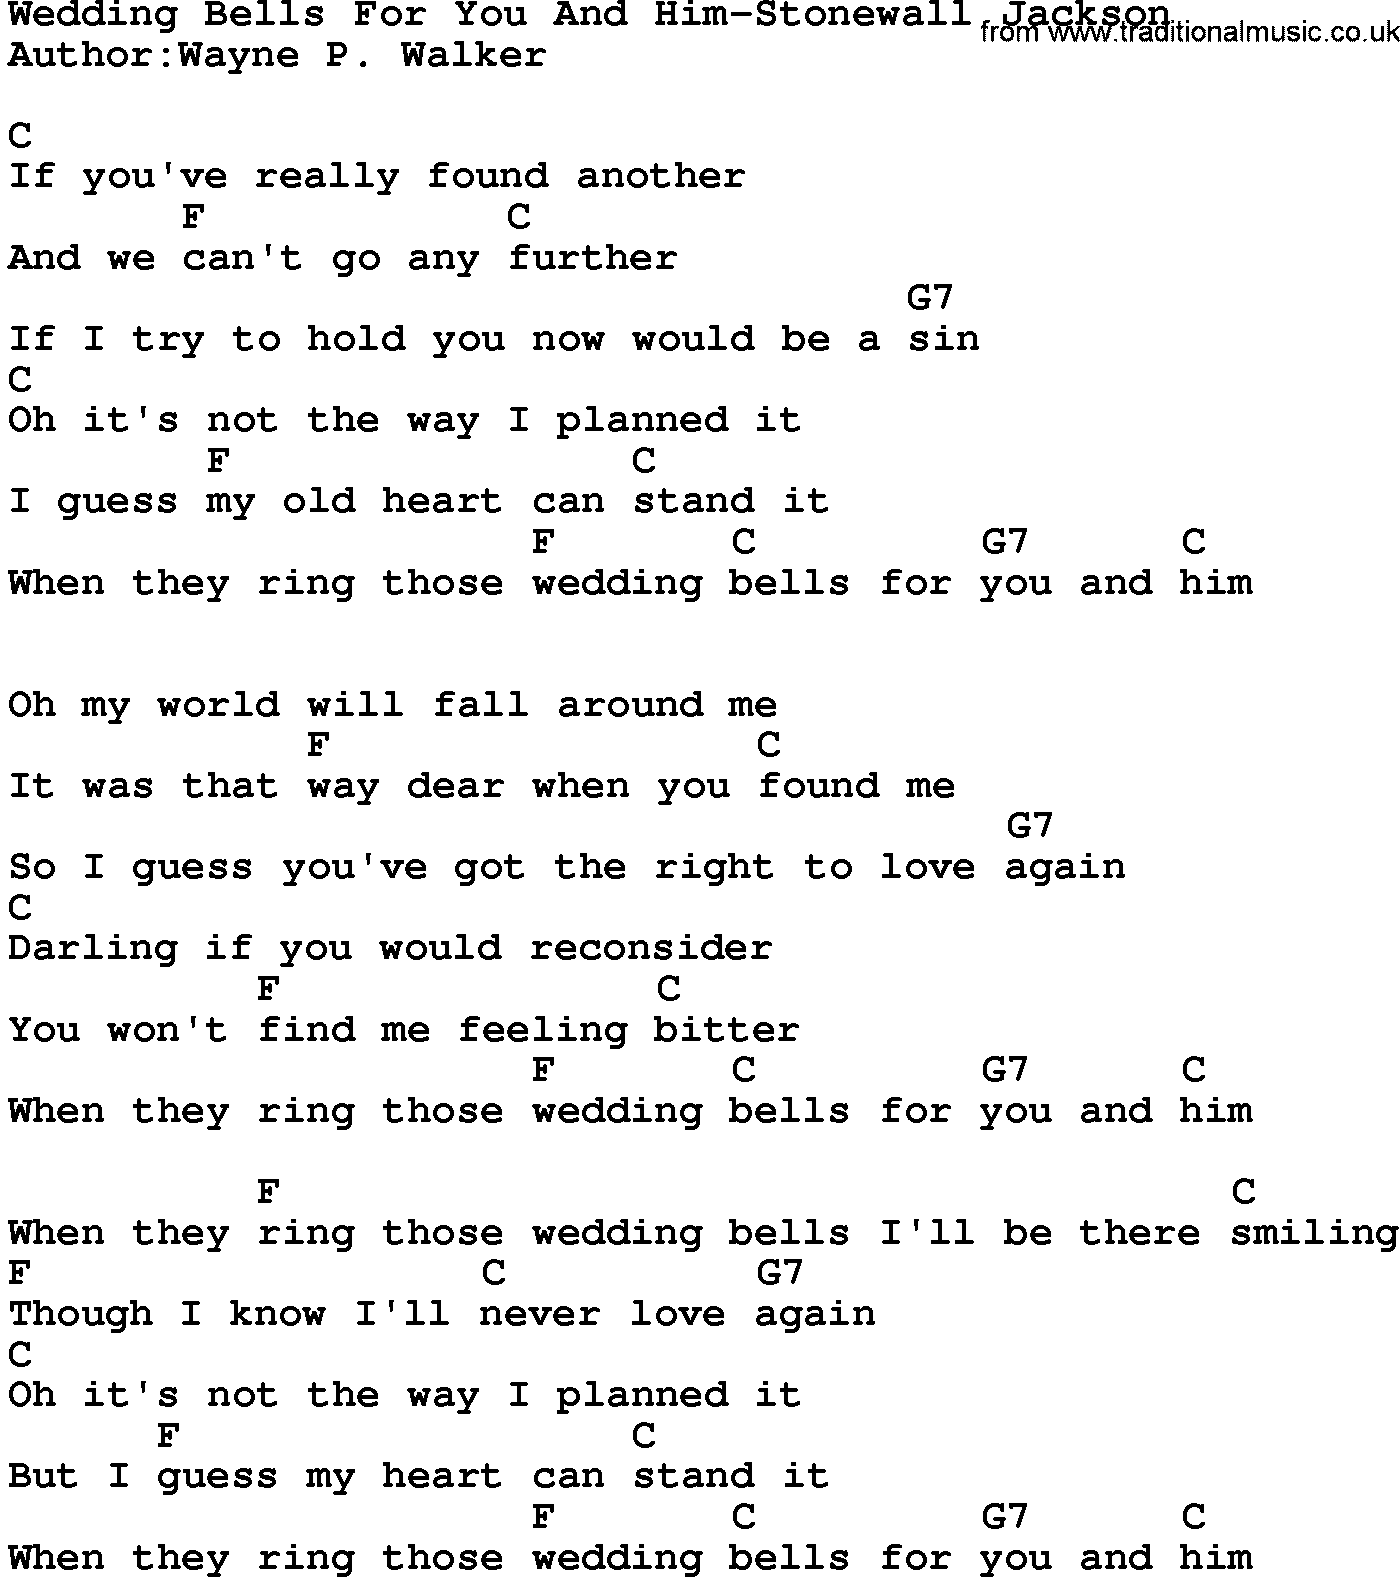 Country music song: Wedding Bells For You And Him-Stonewall Jackson lyrics and chords